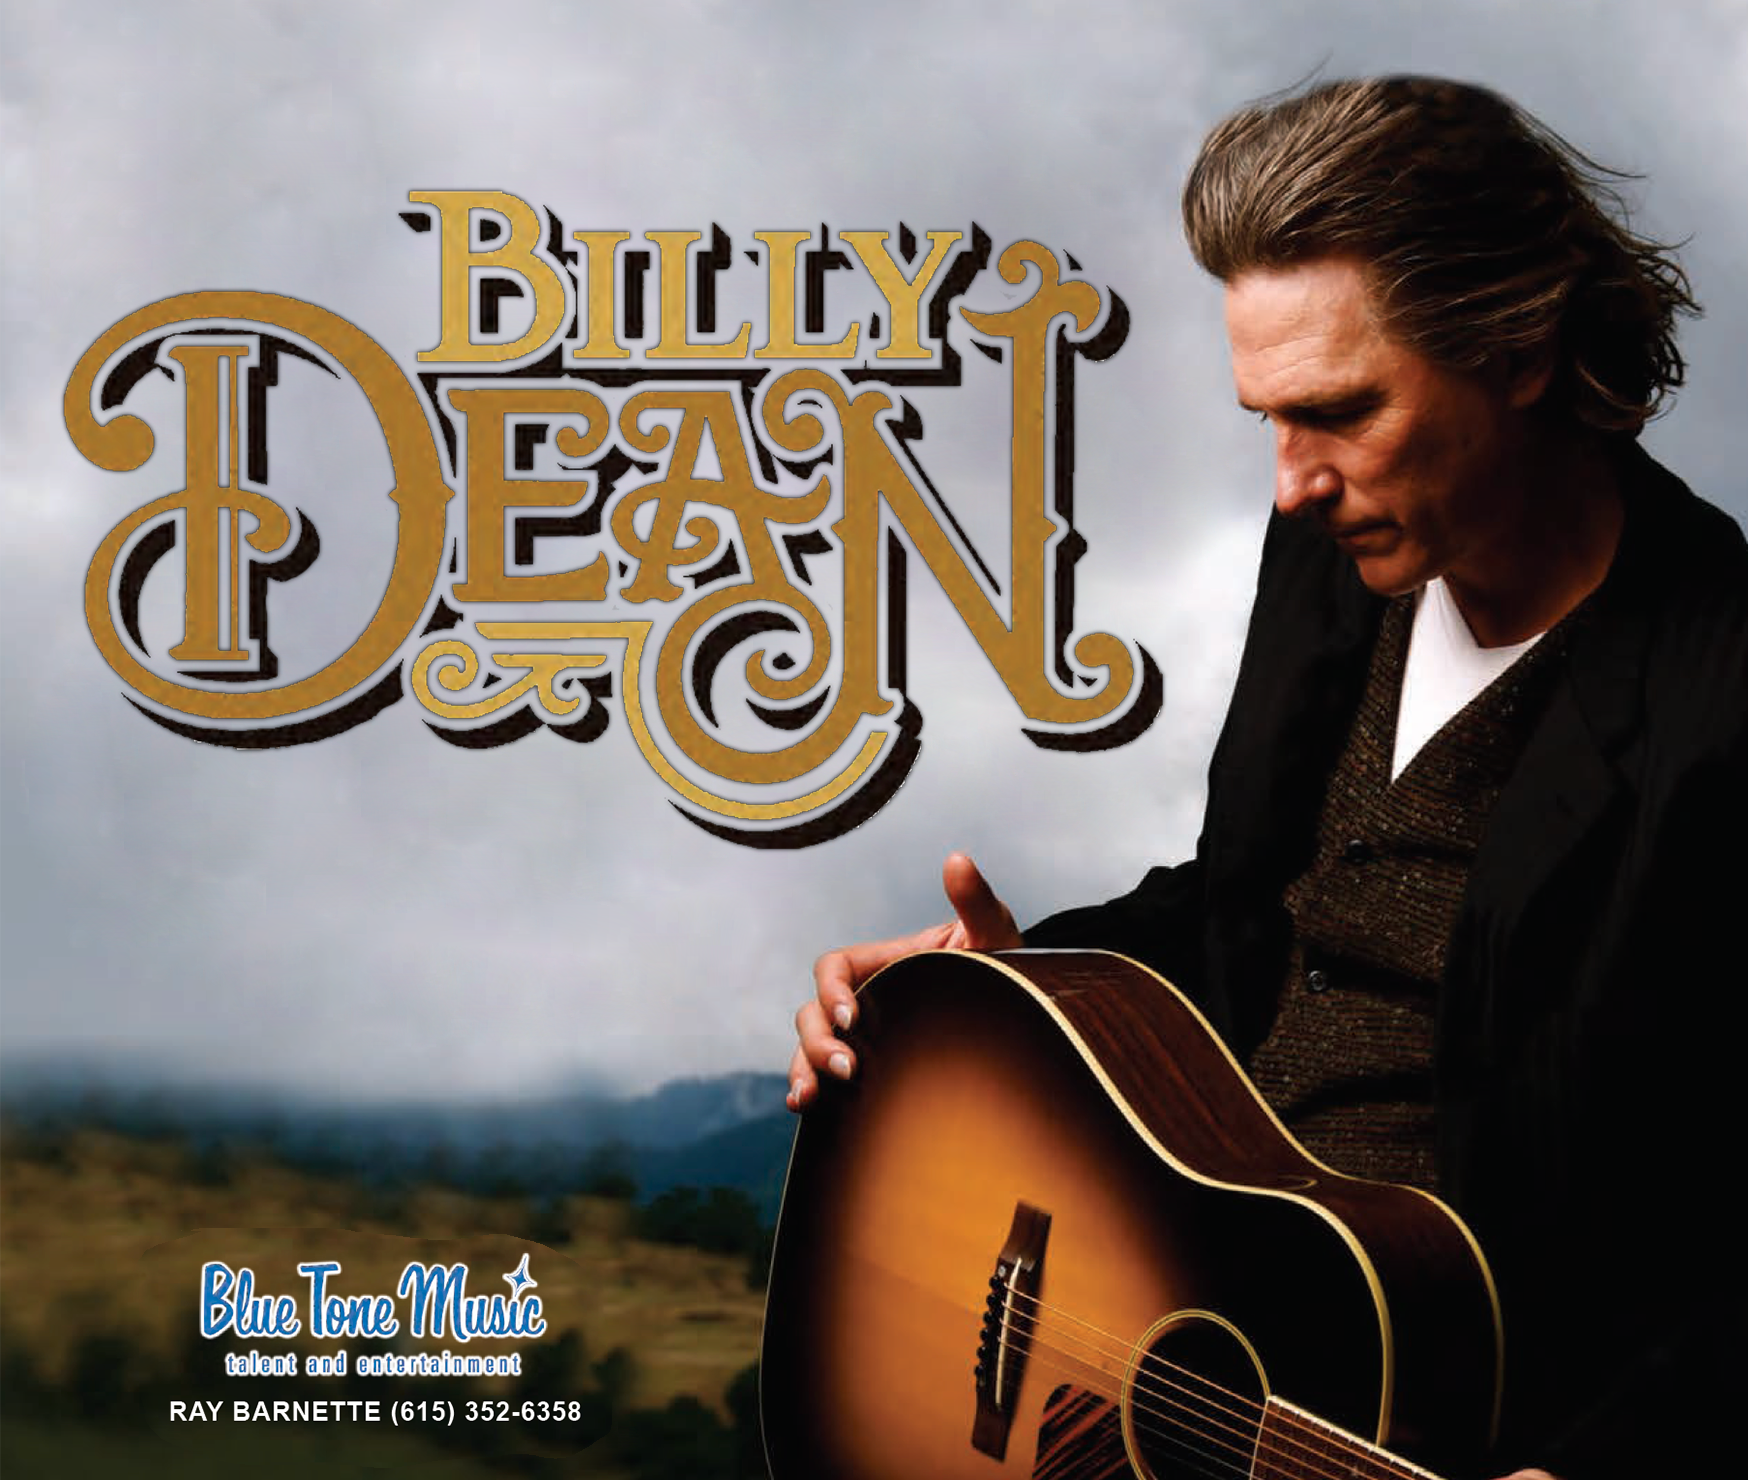 Billy Dean | Players Circle Theater